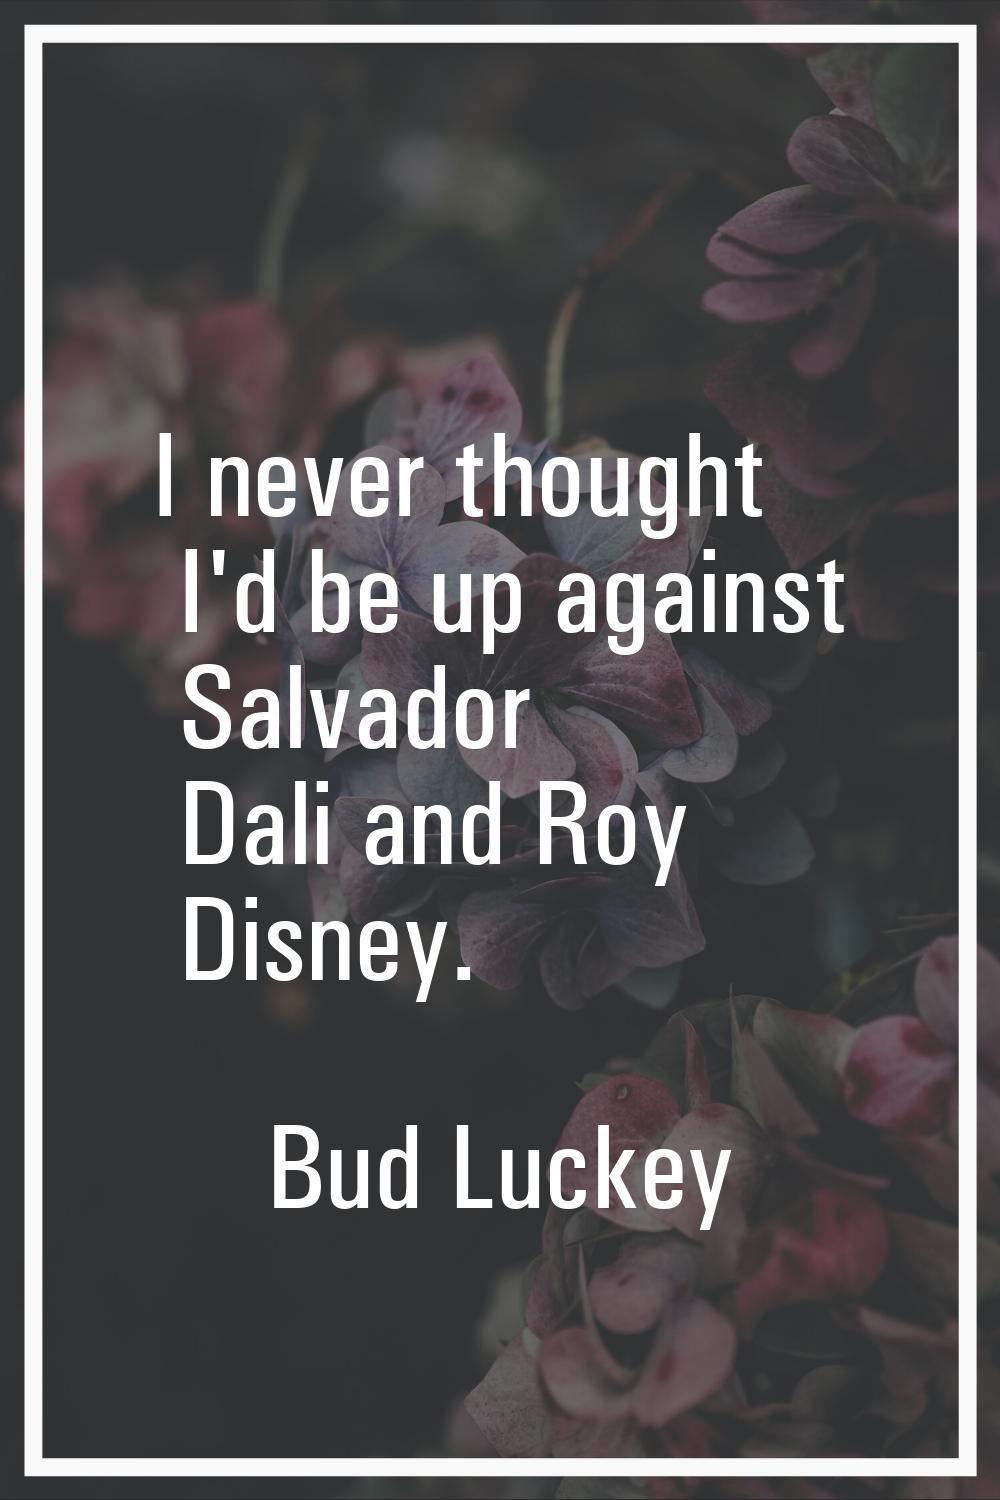 I never thought I'd be up against Salvador Dali and Roy Disney.